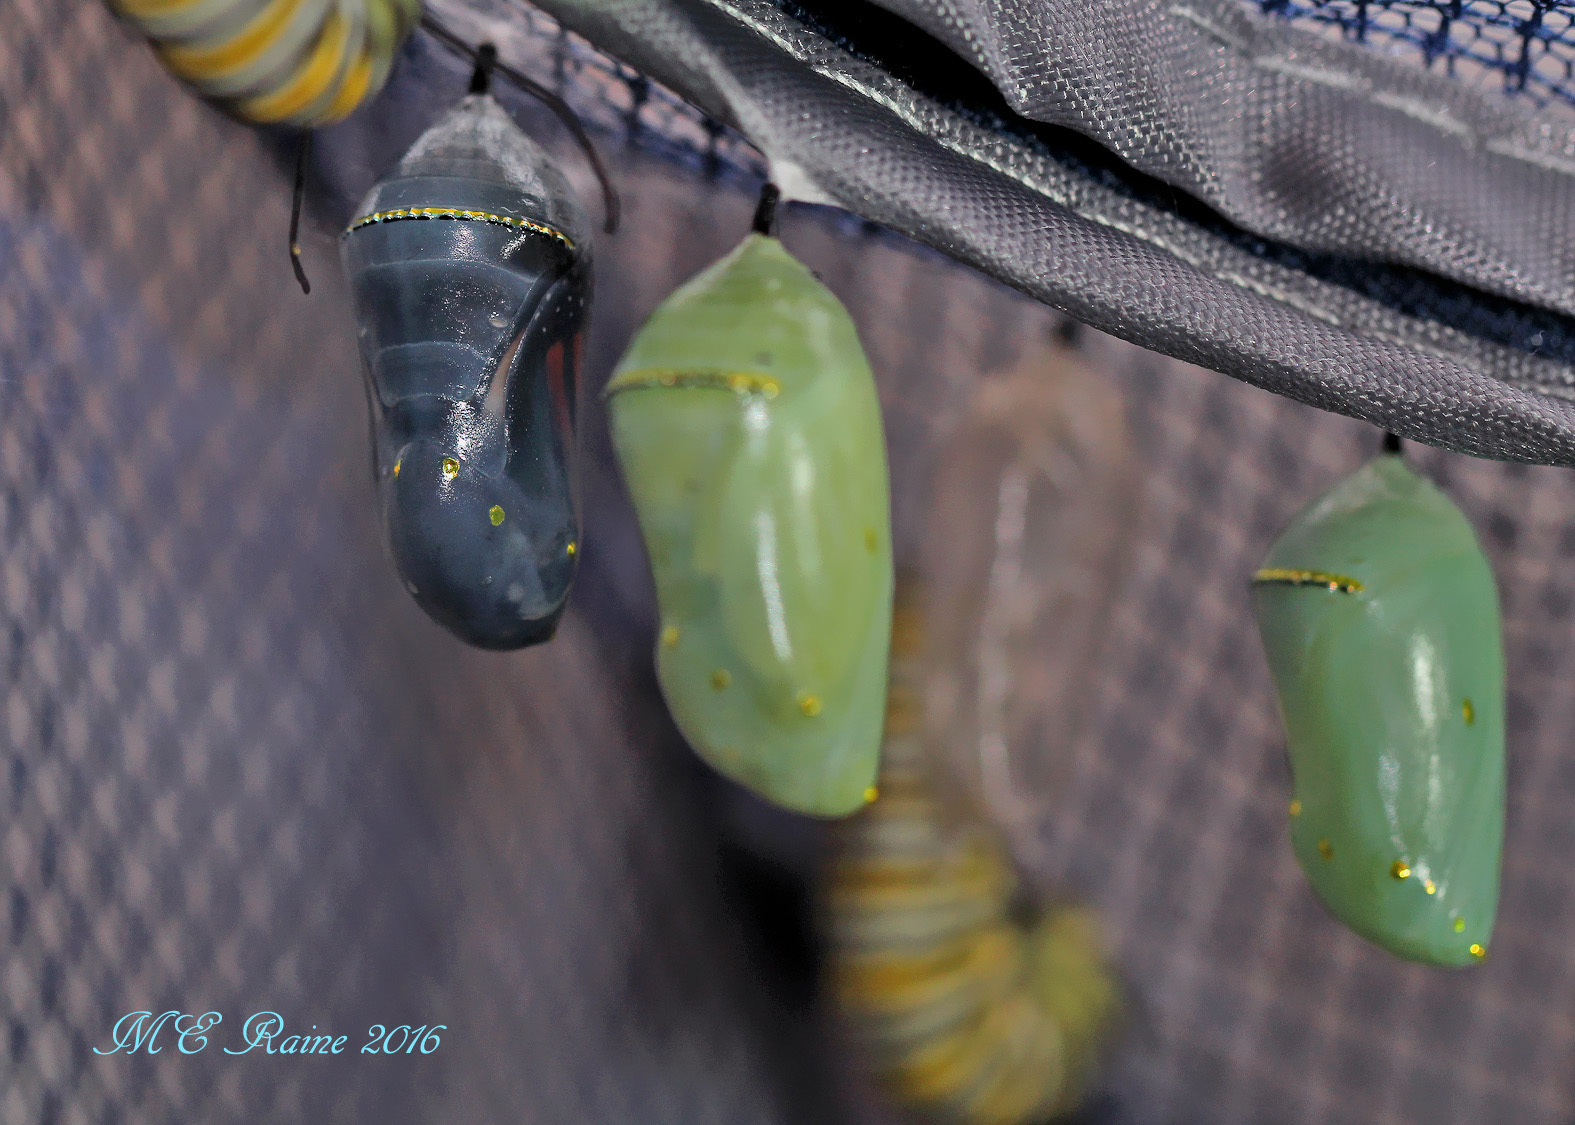 monarch-butterfly-no-2-chrysalis-final-stage-after-8-days-in-safe-house-1-091616-11pm-ok-wm